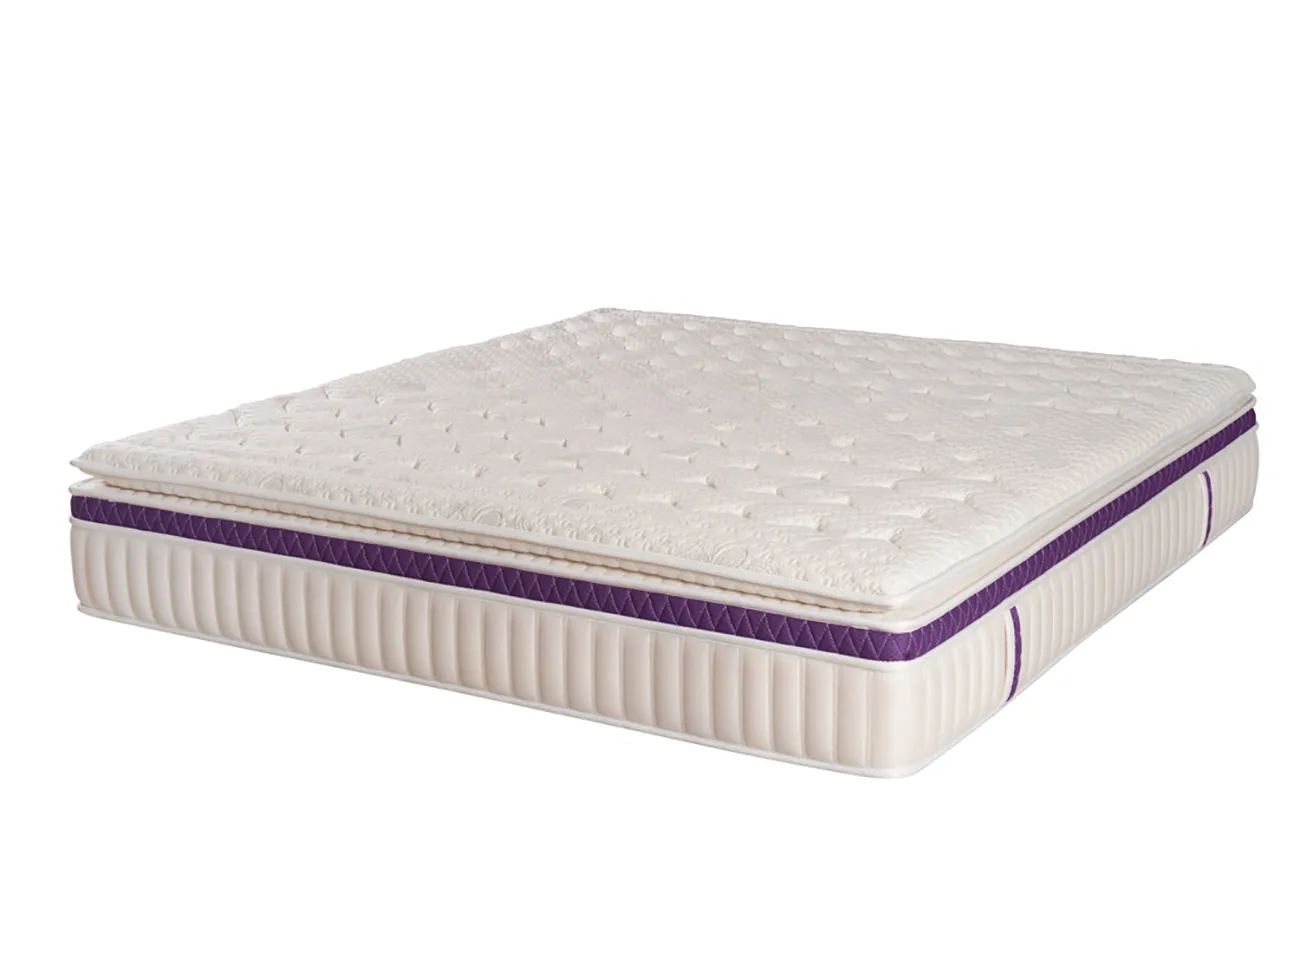 What You Need To Know About Buying Your Next Mattress